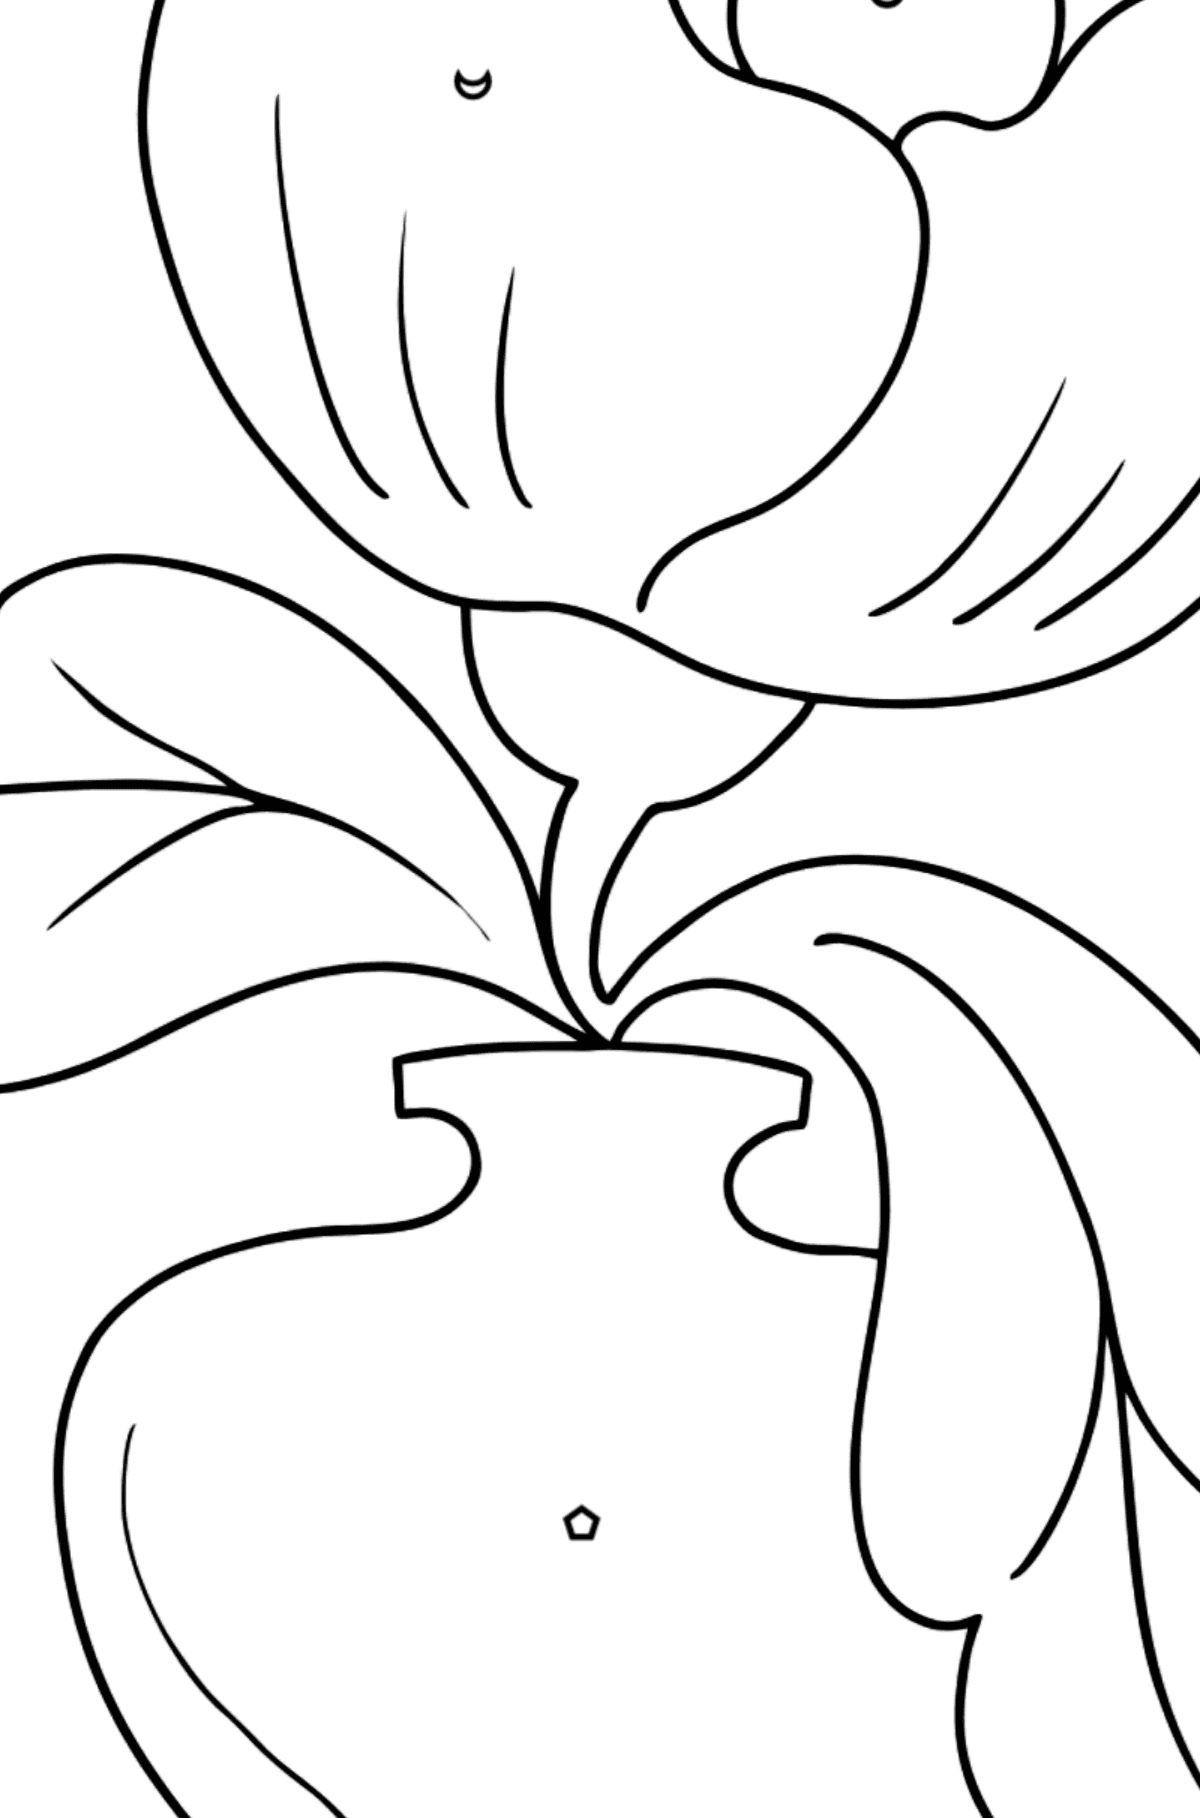 Coloring Page - flowers in a vase - Coloring by Geometric Shapes for Kids